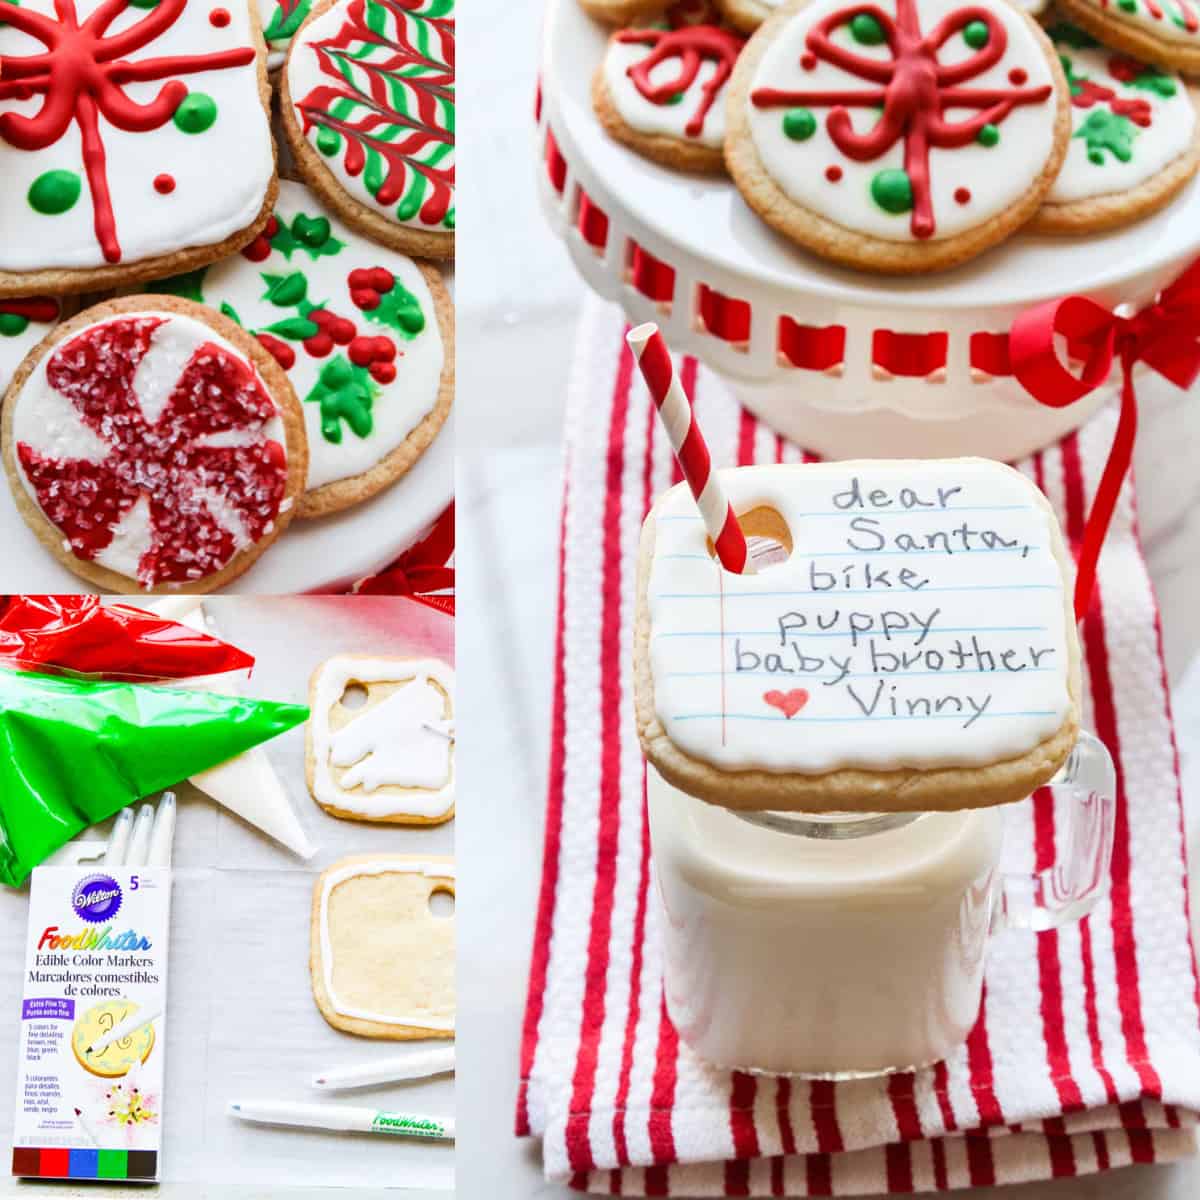 https://www.delicioustable.com/wp-content/uploads/2021/11/Christmas-Cookies-for-Santa-featured.jpg